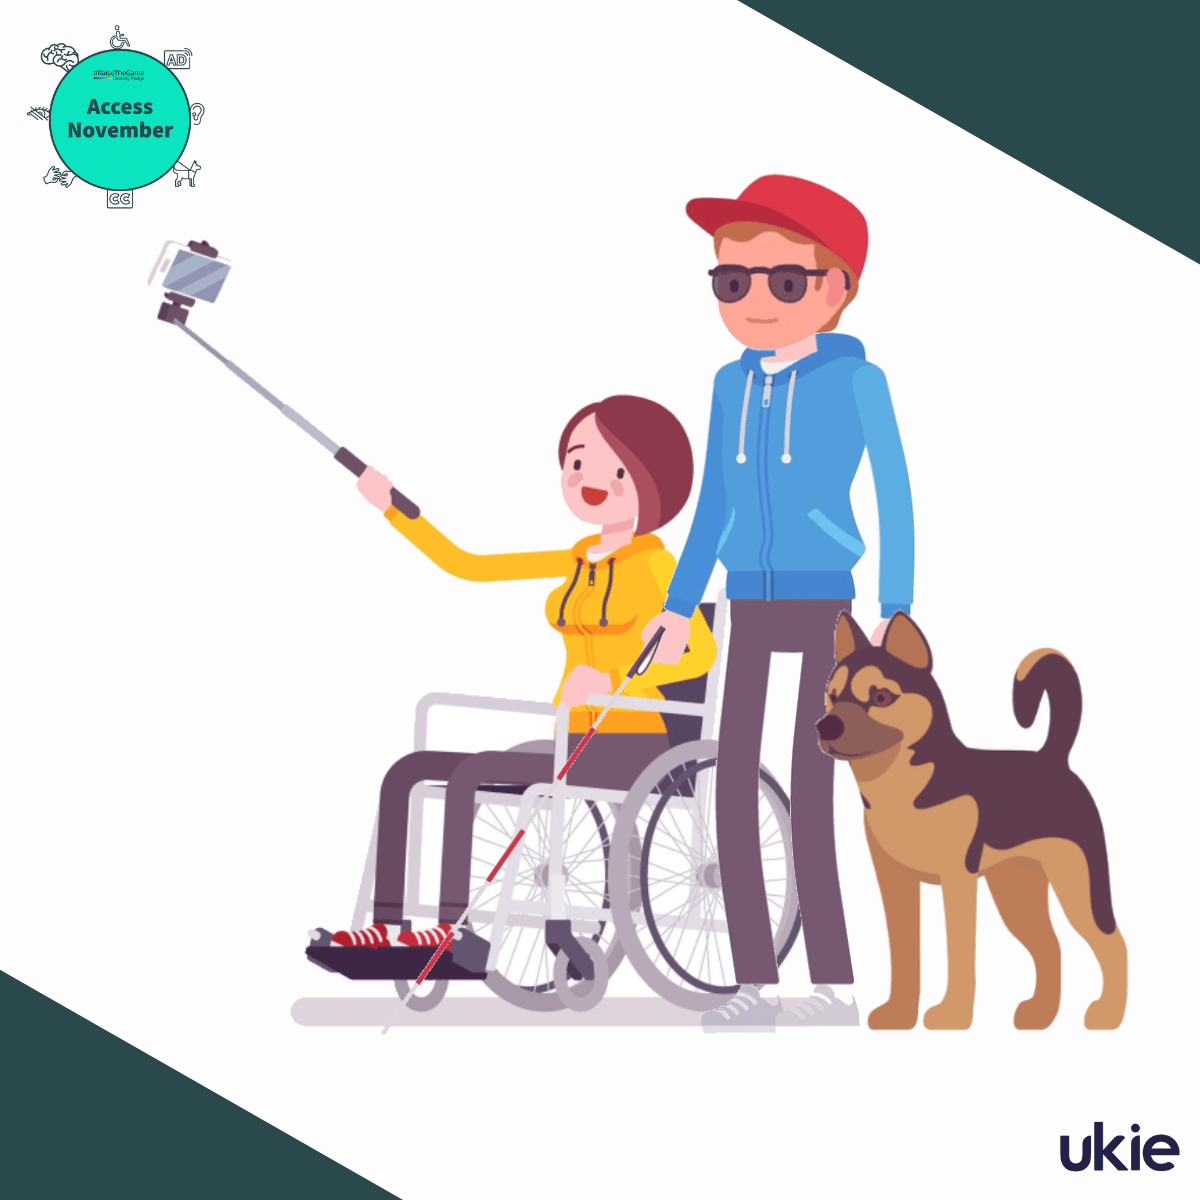 Image depicting two friends smiling, one who happens to be a wheelchair user and the other who is blind with both an assistance dog and a cane, taking a selfie together.